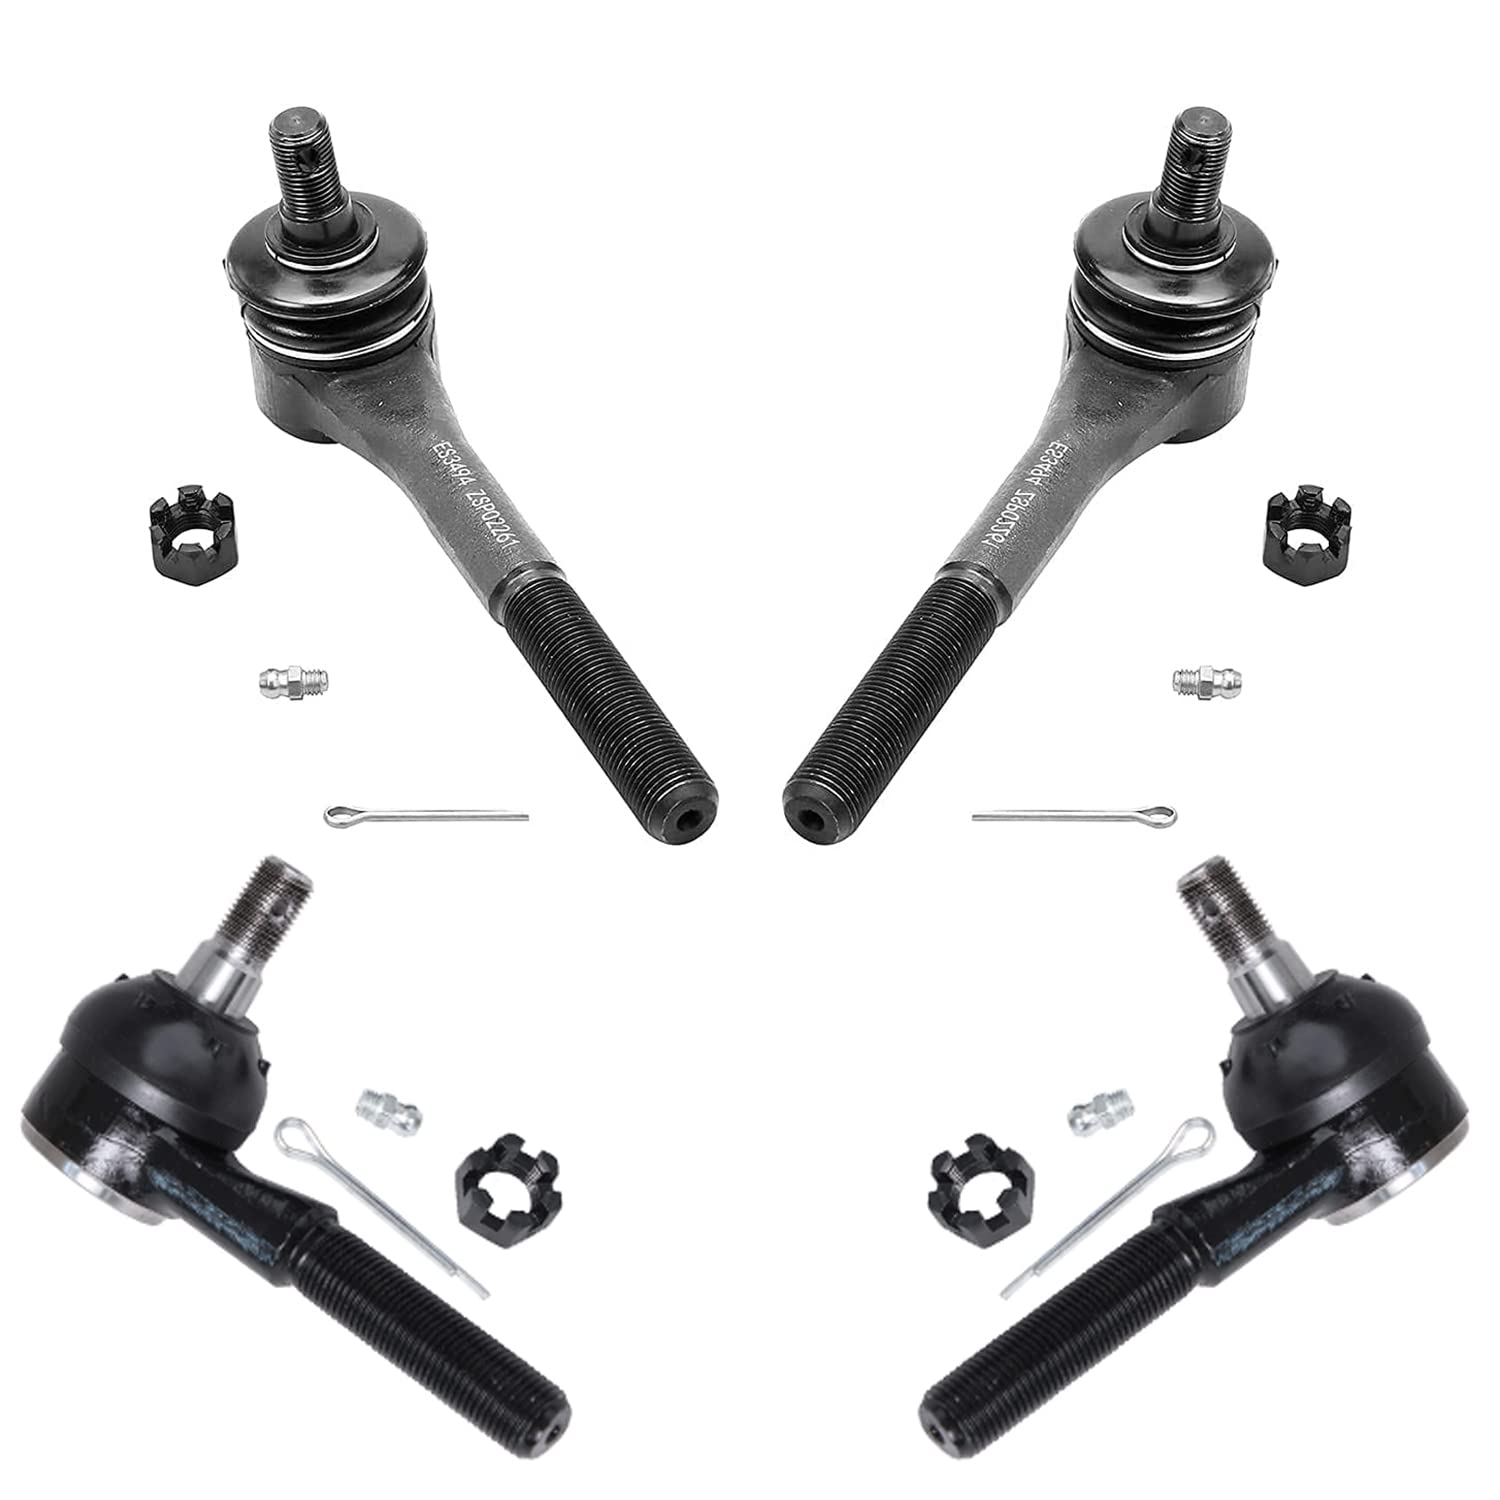 Detroit Axle - Front 16pc Suspension Kit for 95-97 Mercury Grand Marquis Ford Crown Victoria Lincoln Town Car Ball Joints Tie Rods Idler Pitman Arm Adjusting Sleeve Replacement Front Rear Sway Bars